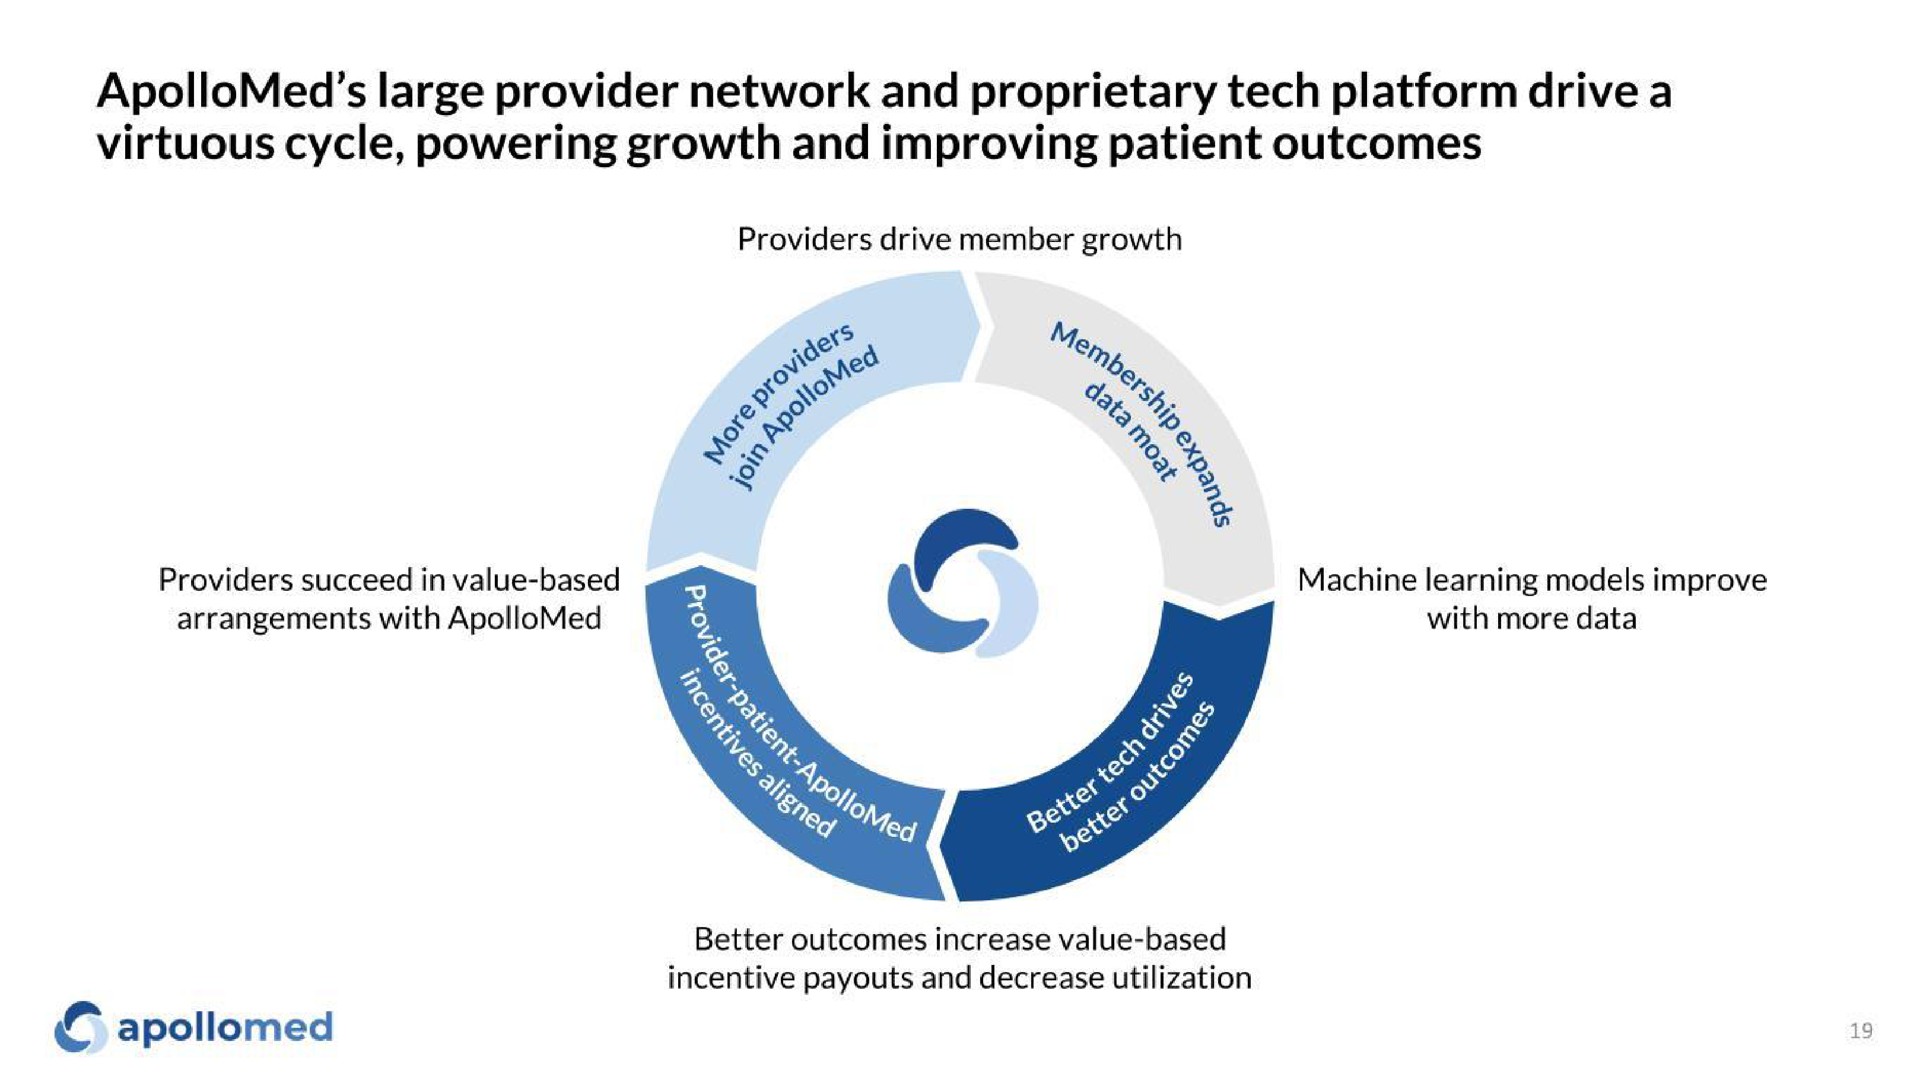 large provider network and proprietary tech platform drive a virtuous cycle powering growth and improving patient outcomes | Apollo Medical Holdings